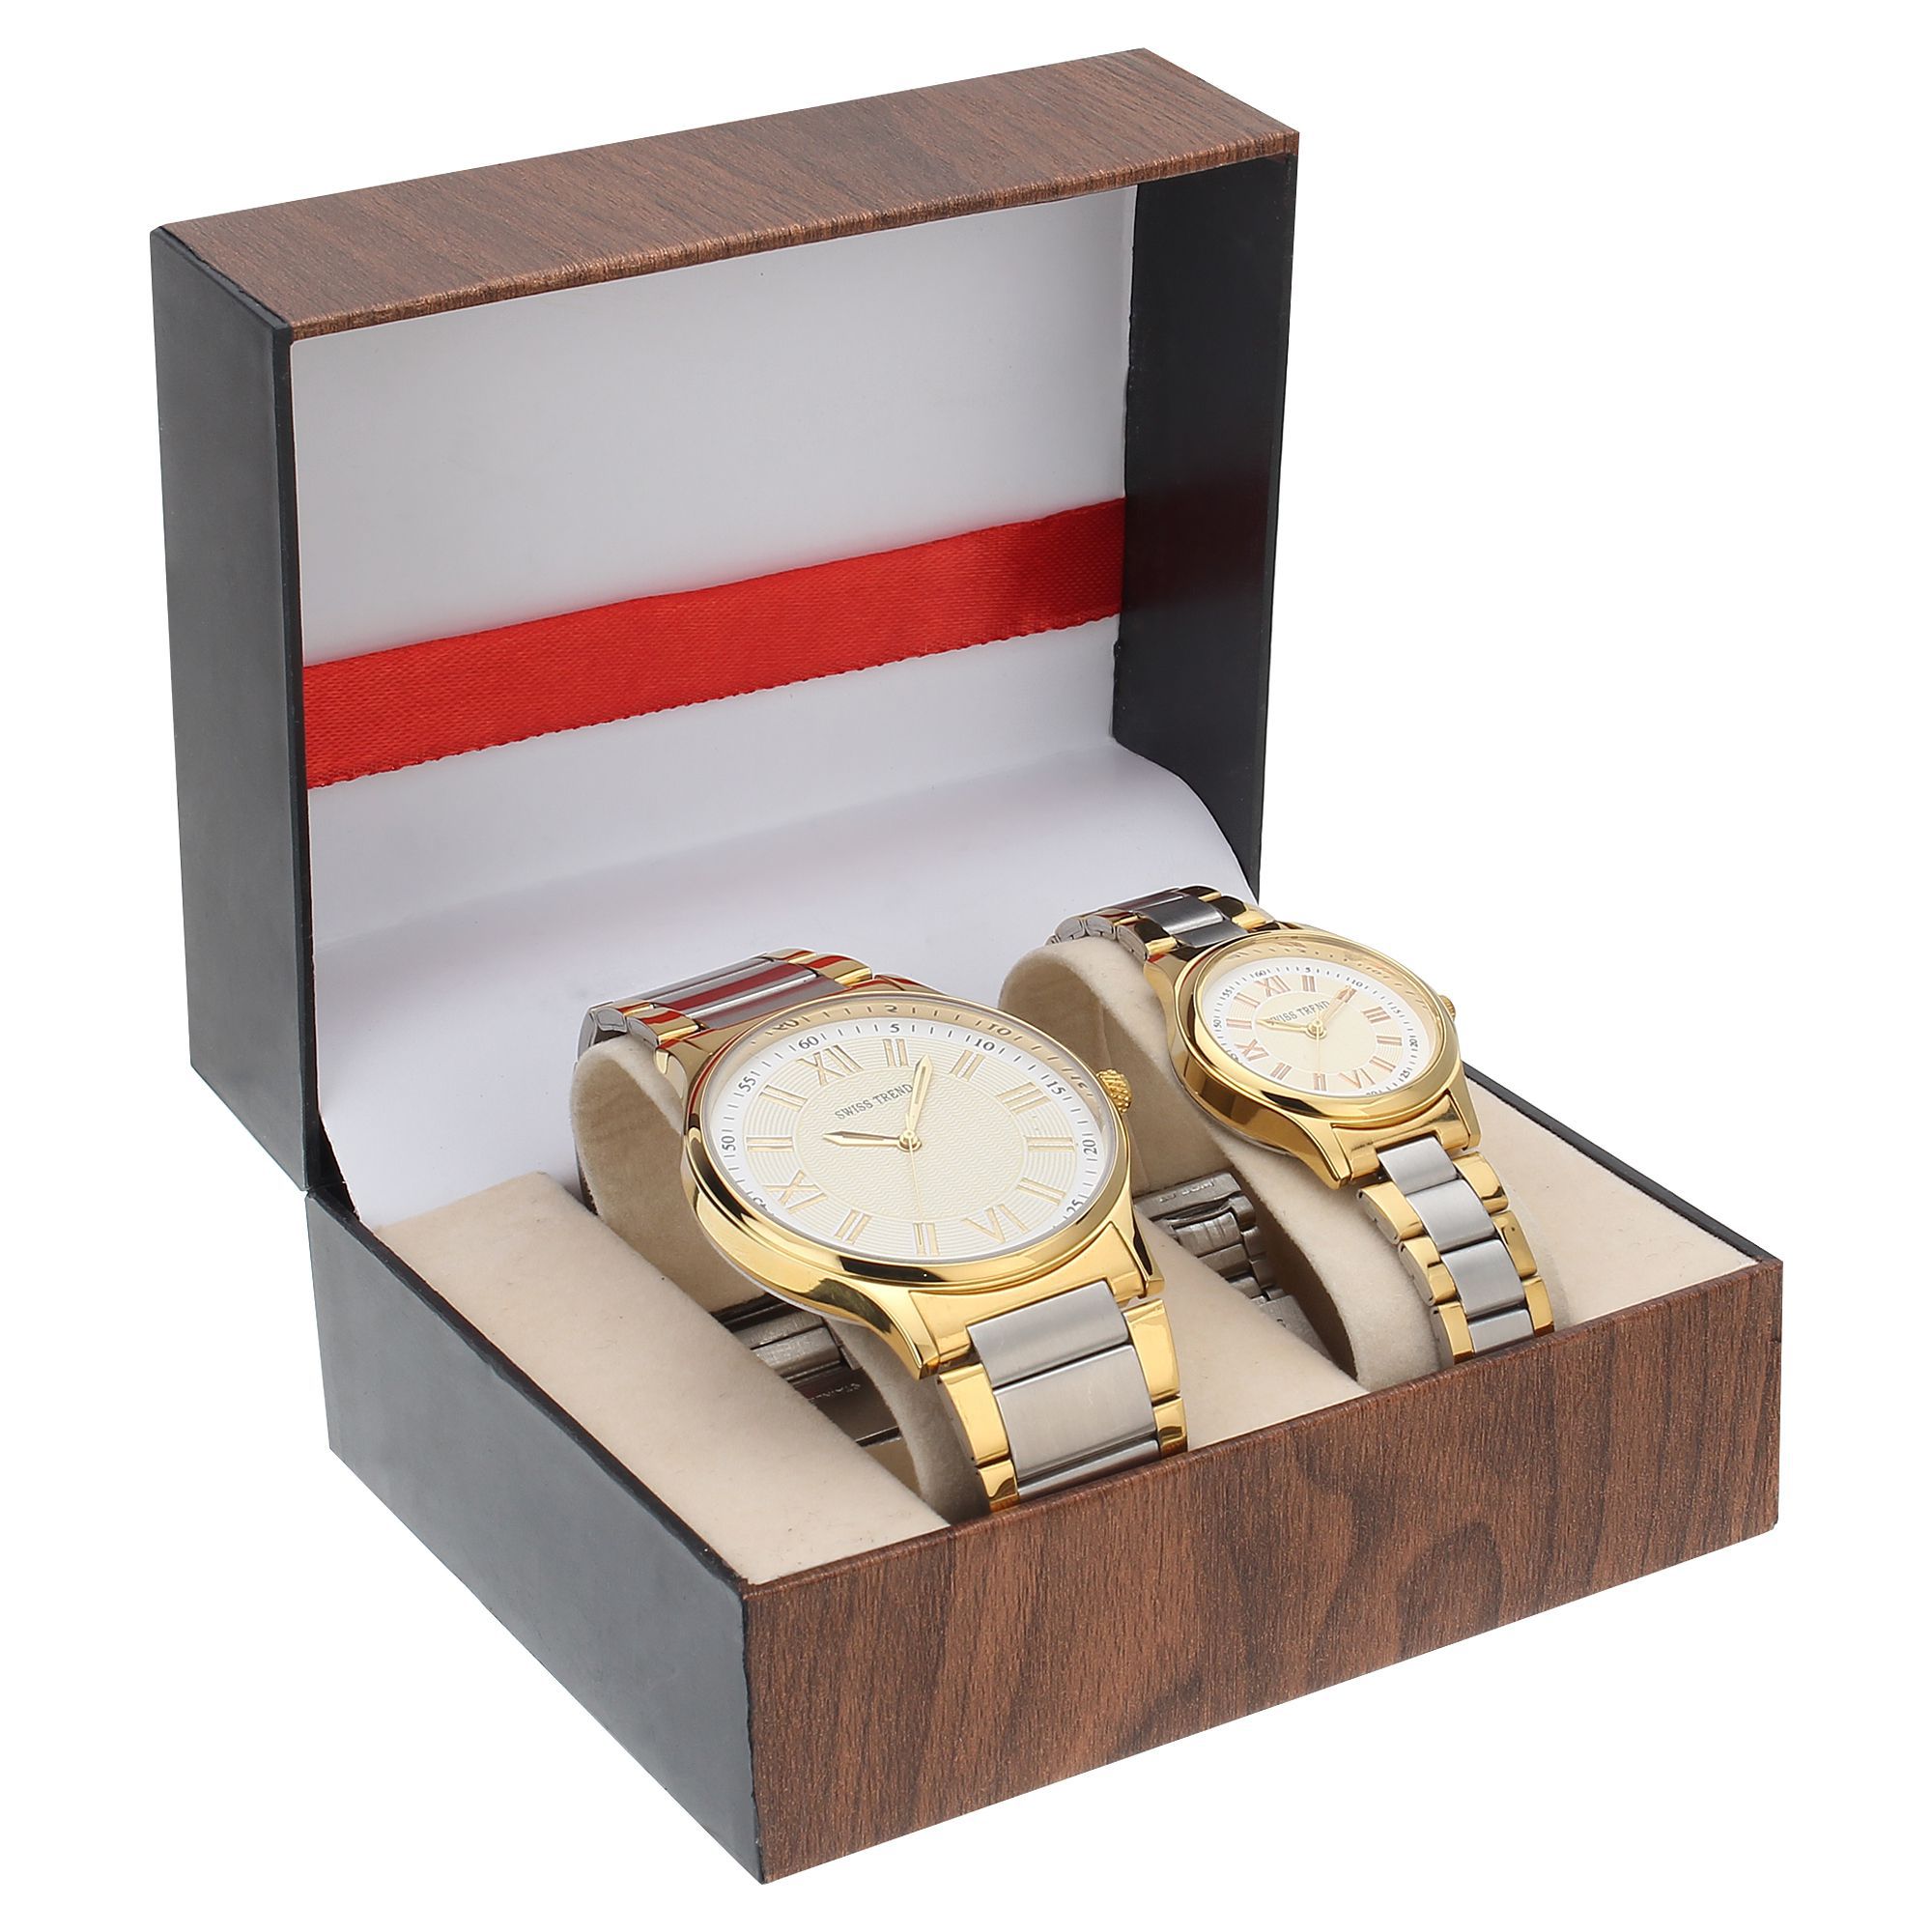 Swiss Trend Robust Analog Couple Watch For Couples Price in India: Buy ...